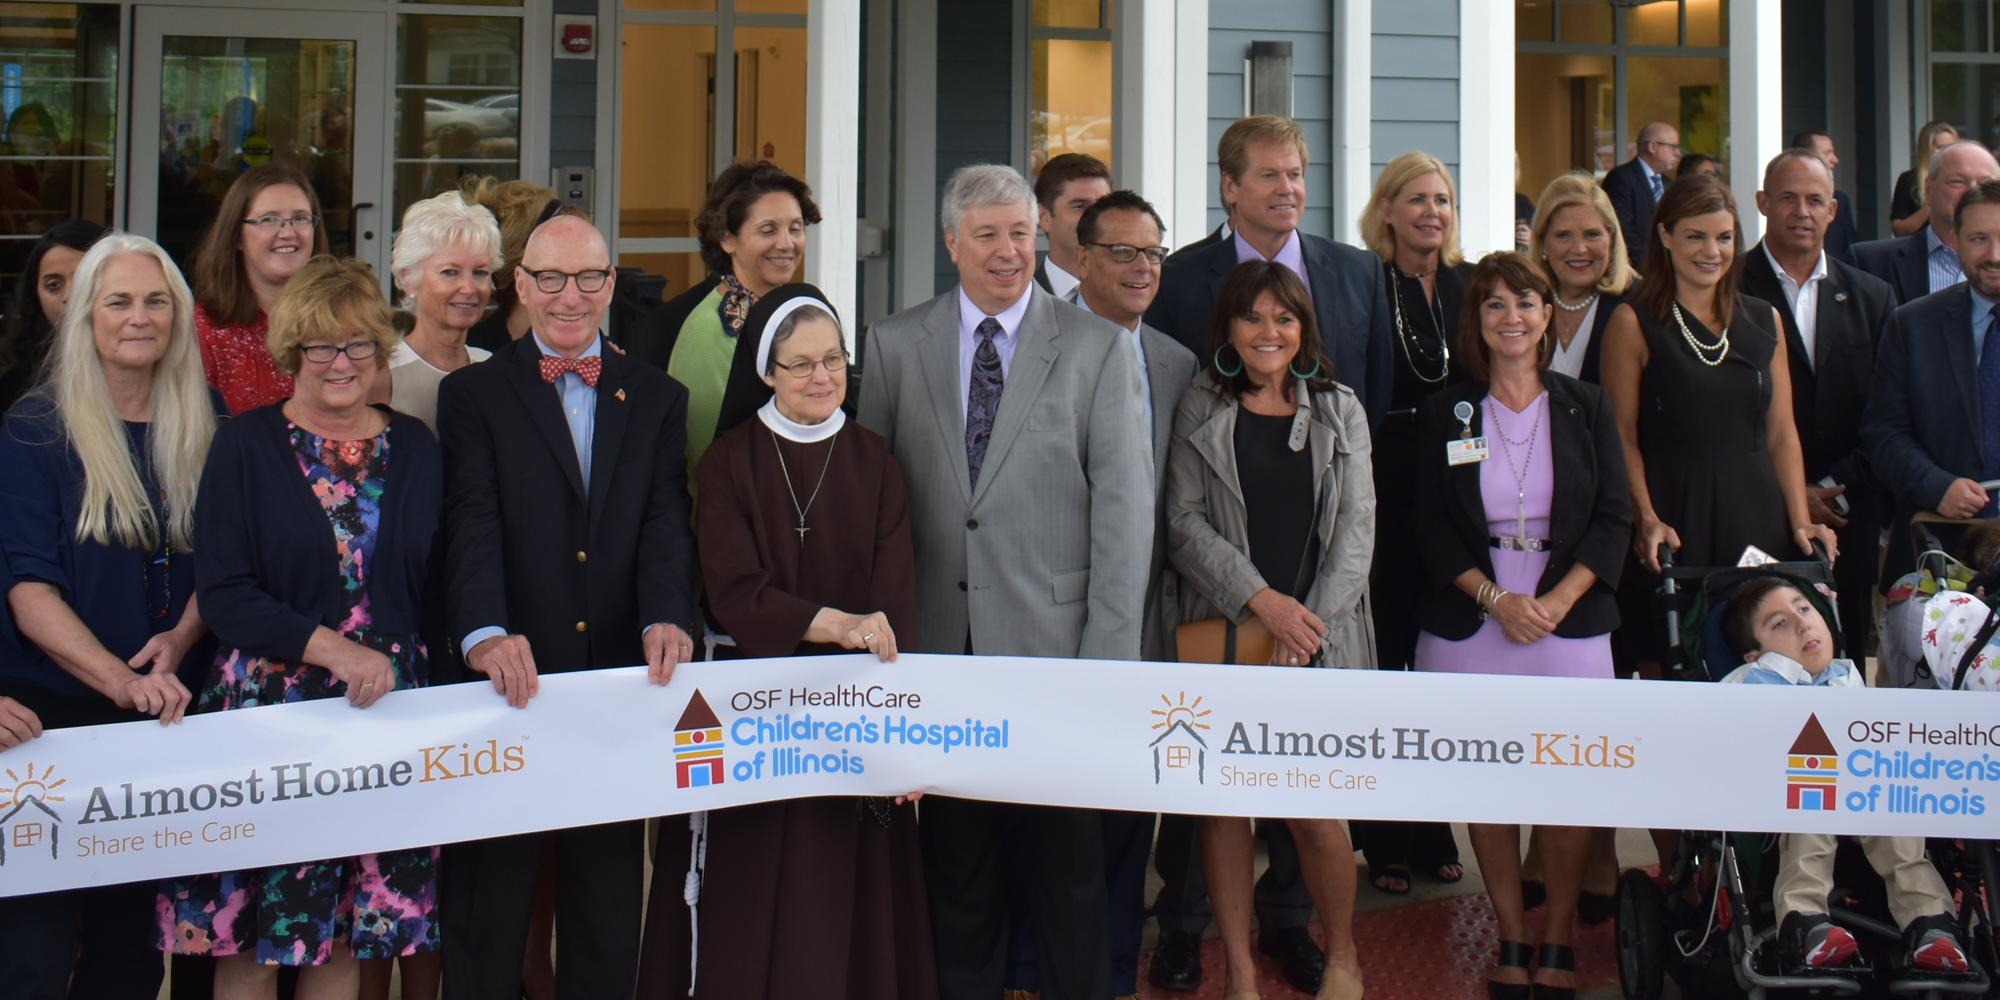 Foundation Almost Home Kids Ribbon Cutting